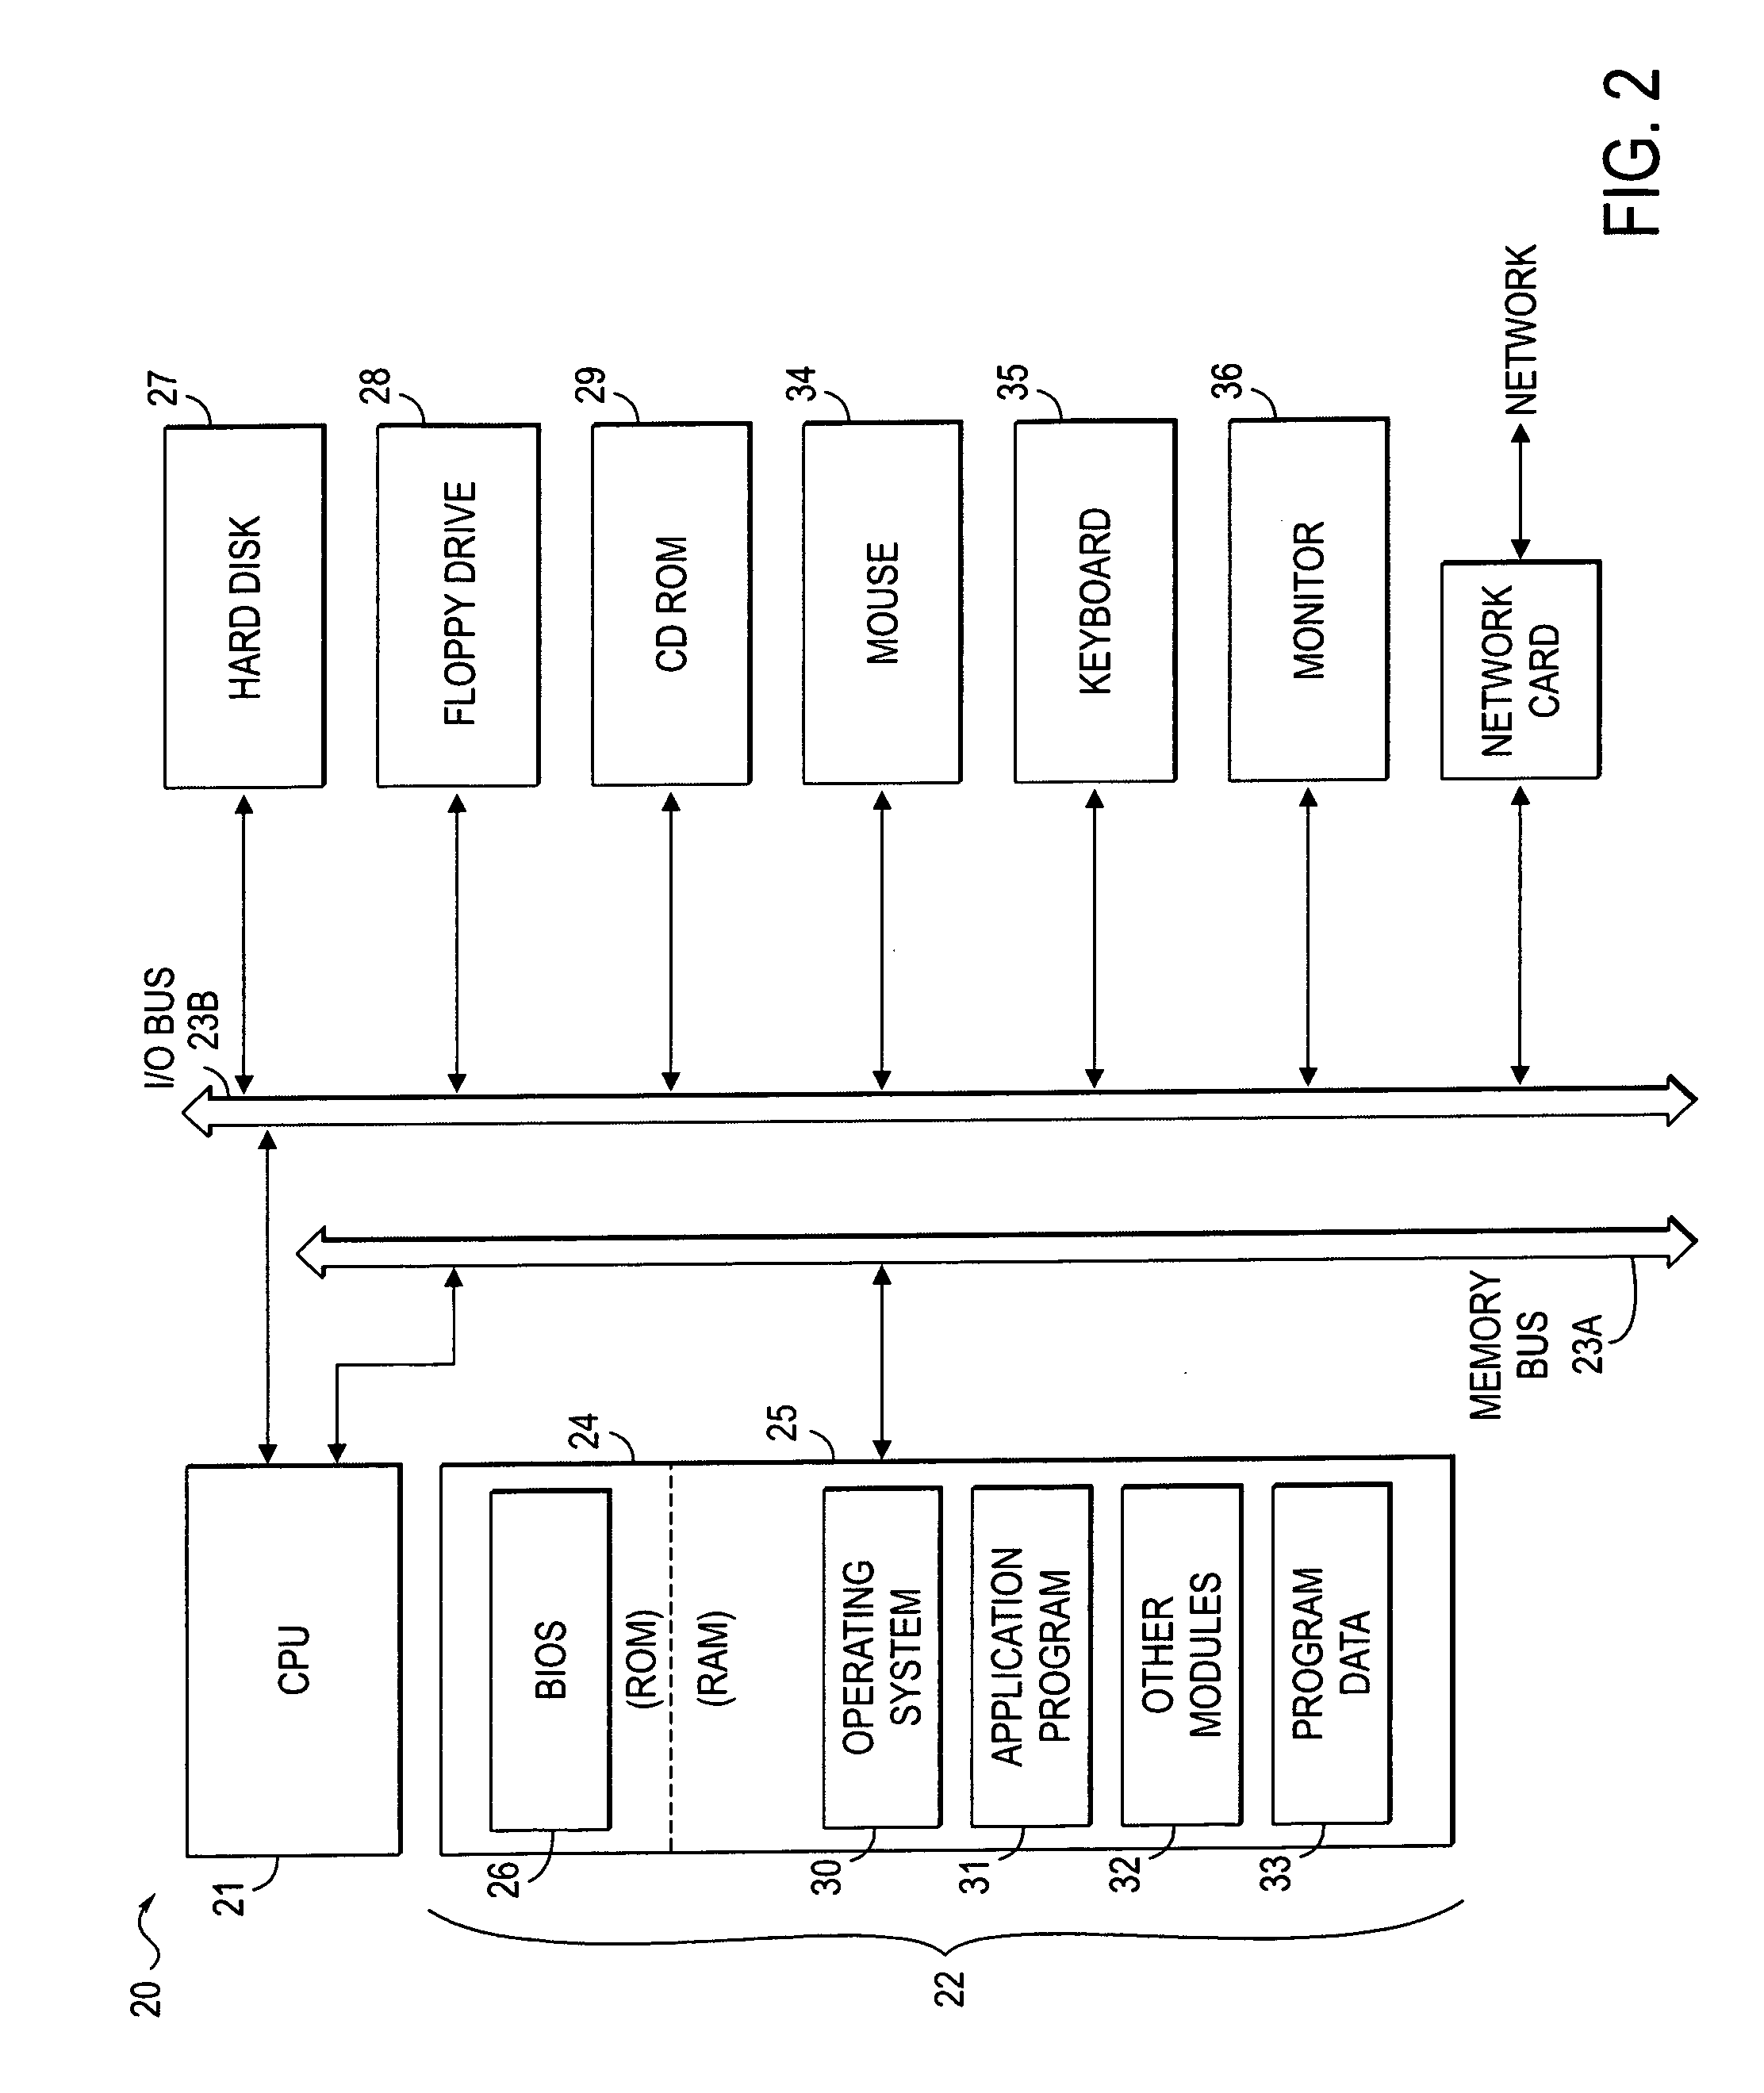 System and method for electronic message notification